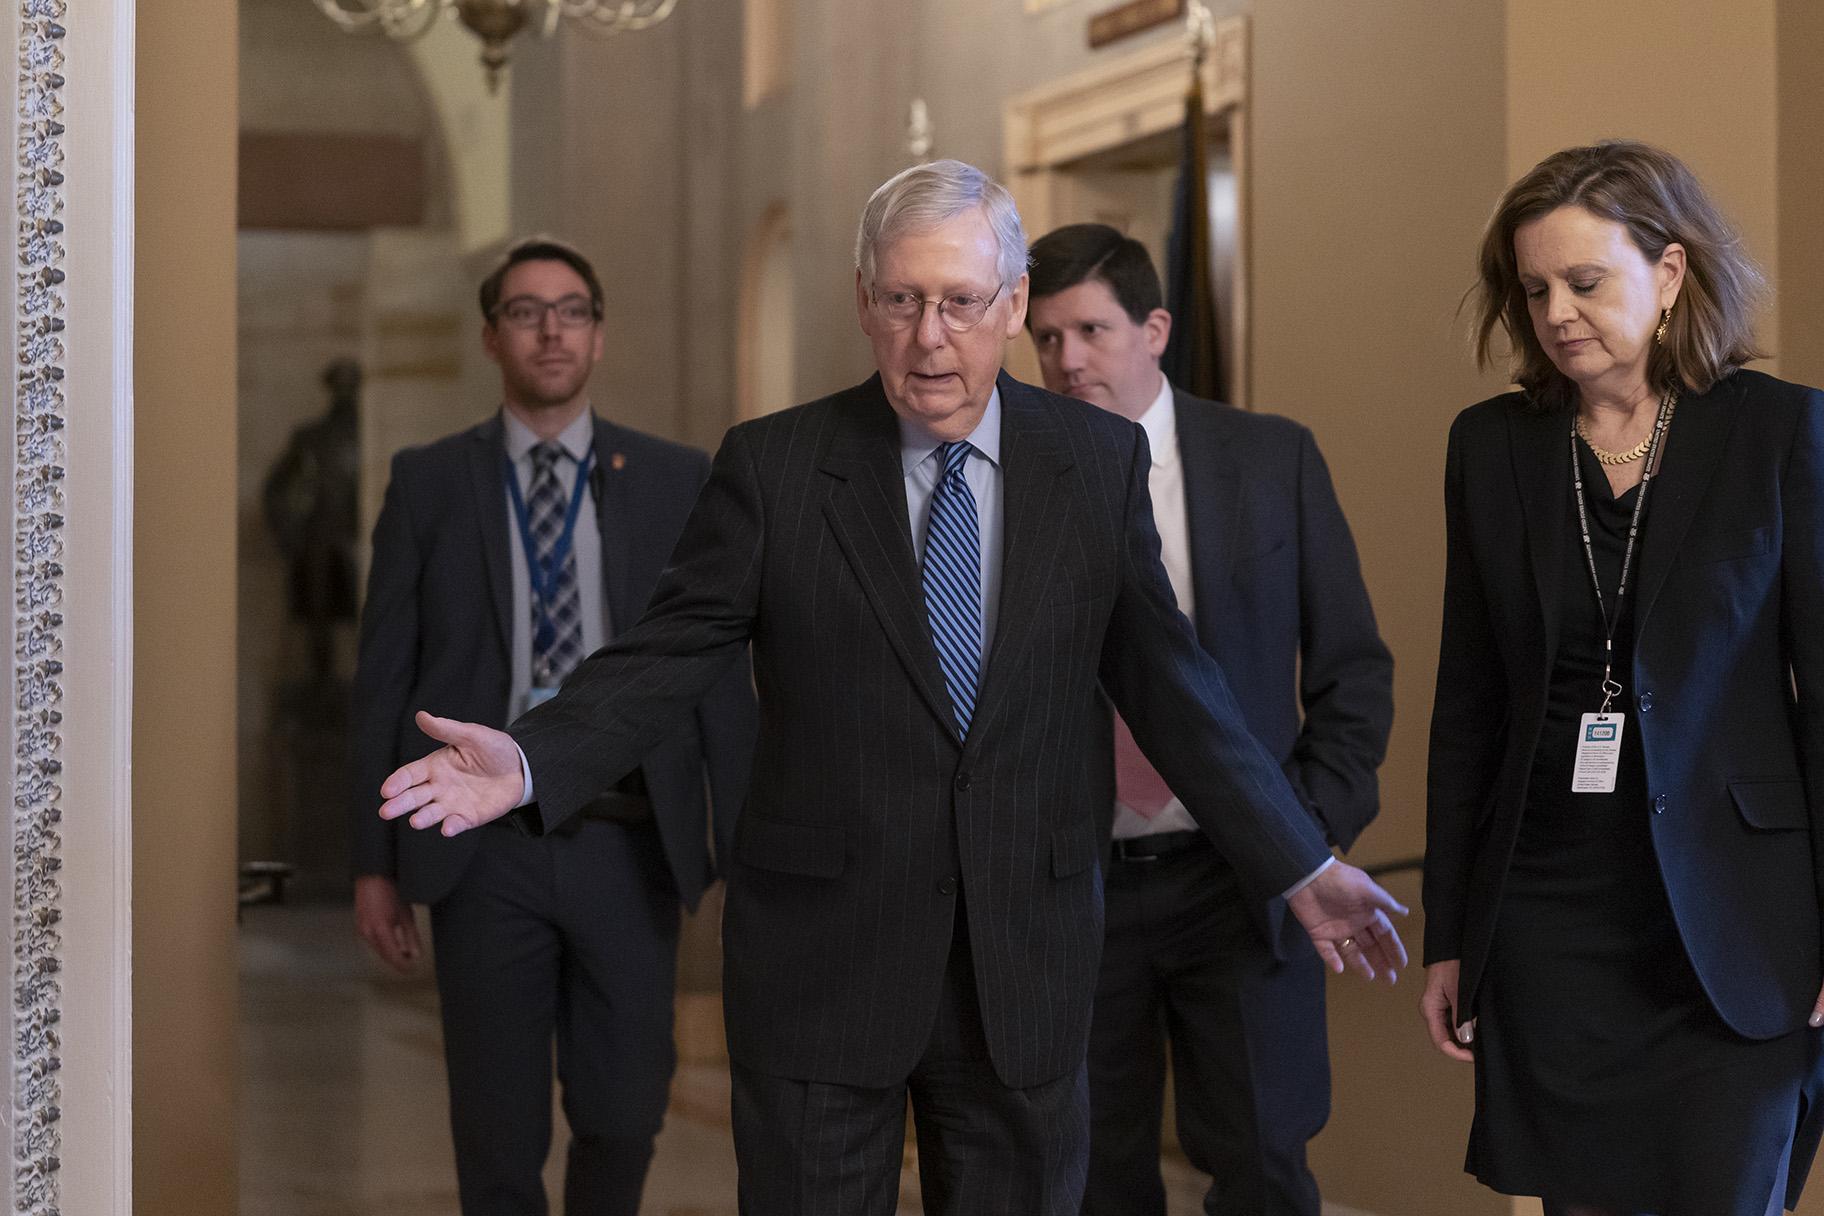 Senate Majority Leader Mitch McConnell, R-Ky., arrives for a closed meeting with fellow Republicans as he strategizes about the looming impeachment trial of President Donald Trump, at the Capitol in Washington, Tuesday, Jan. 7, 2020. (AP Photo / J. Scott Applewhite)